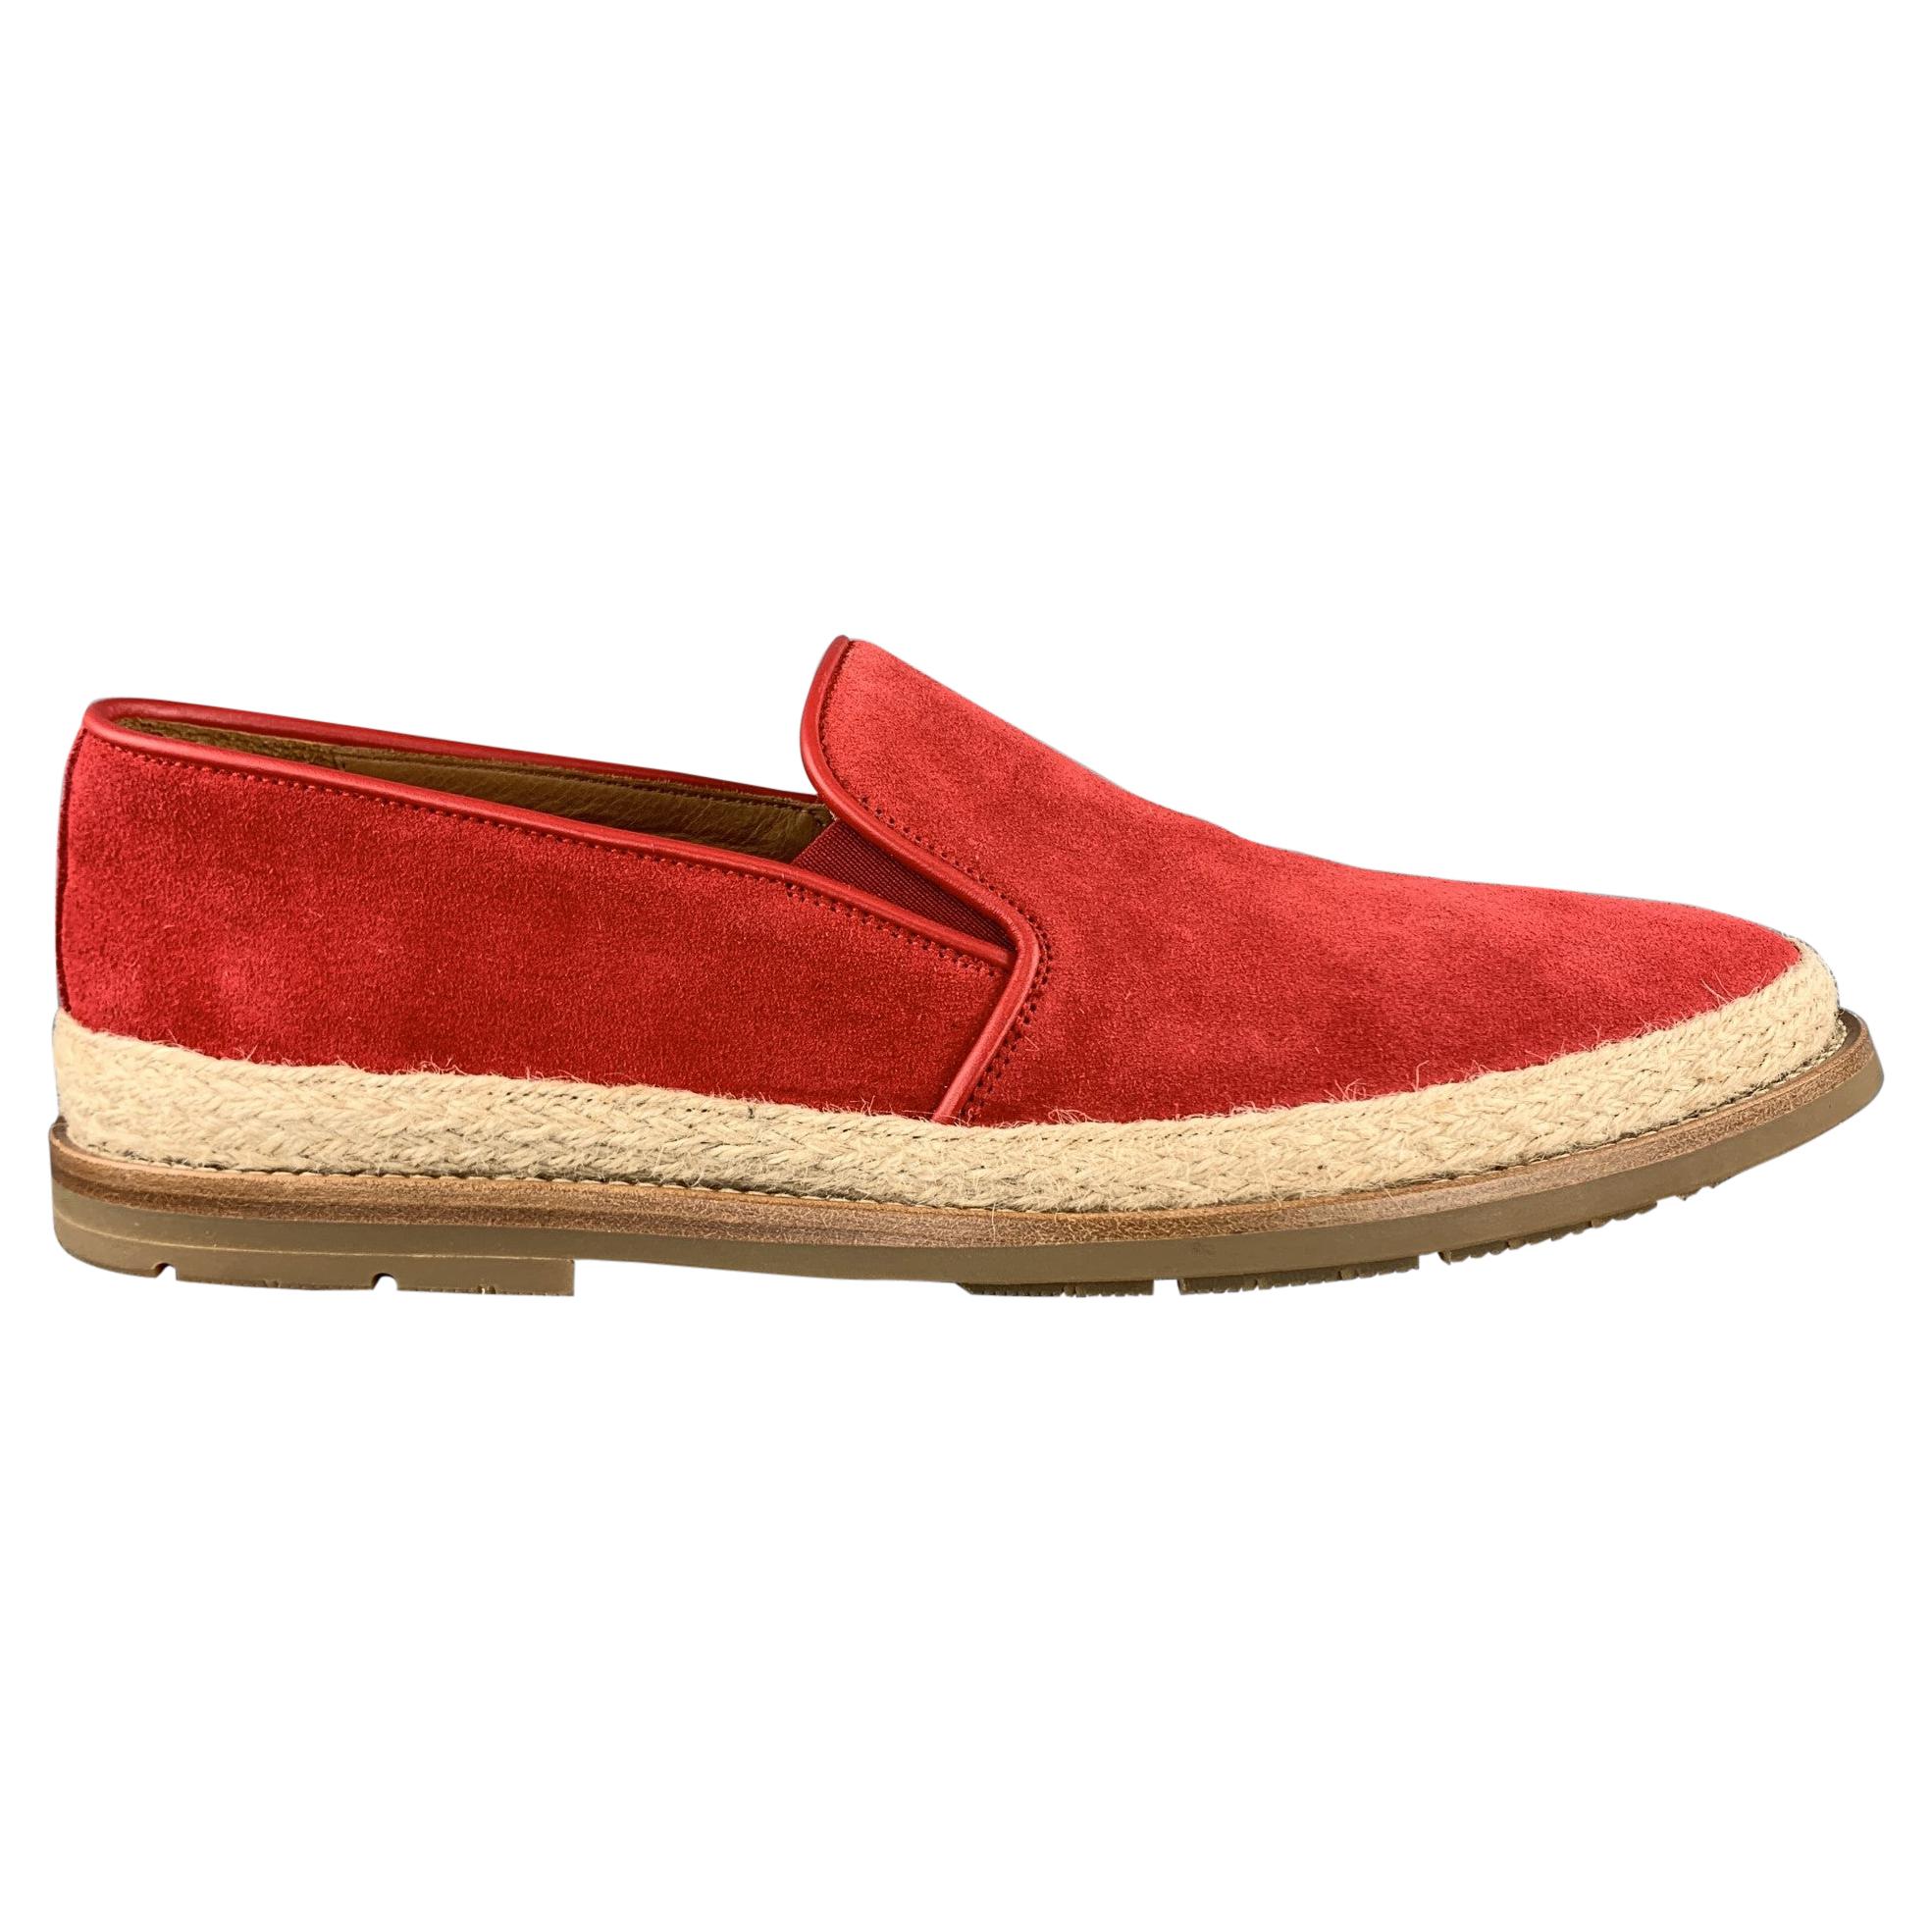 AQUATALIA Size 11 Red Suede Braided Trim Rubber Sole Loafers